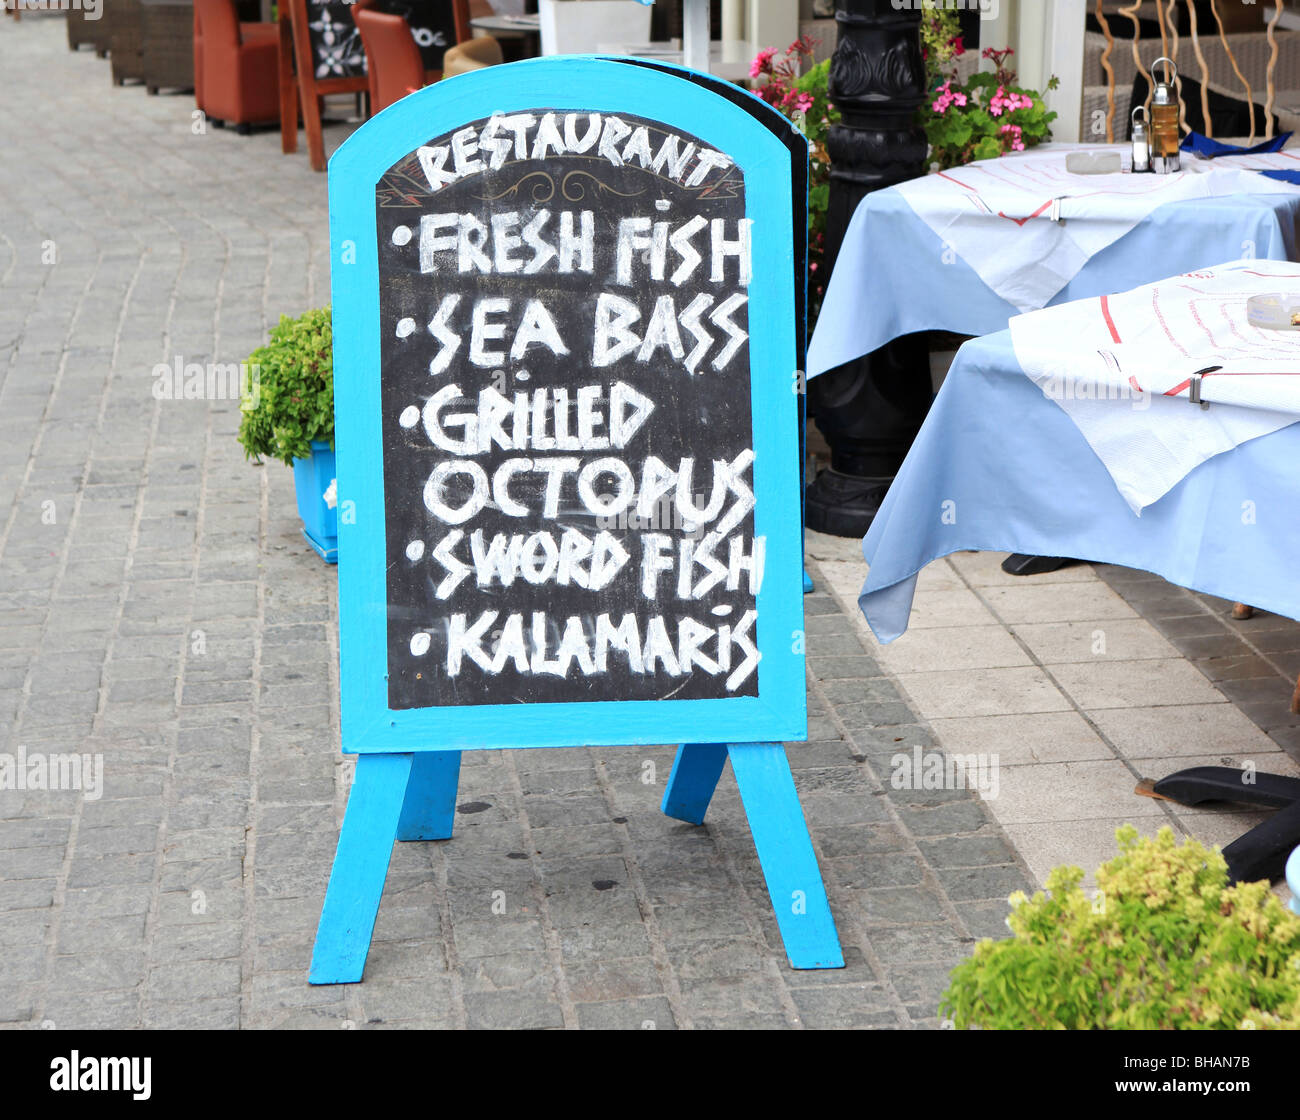 Chalk menu board standing outside of a fish restaurant. This image was taken in Greece. Stock Photo